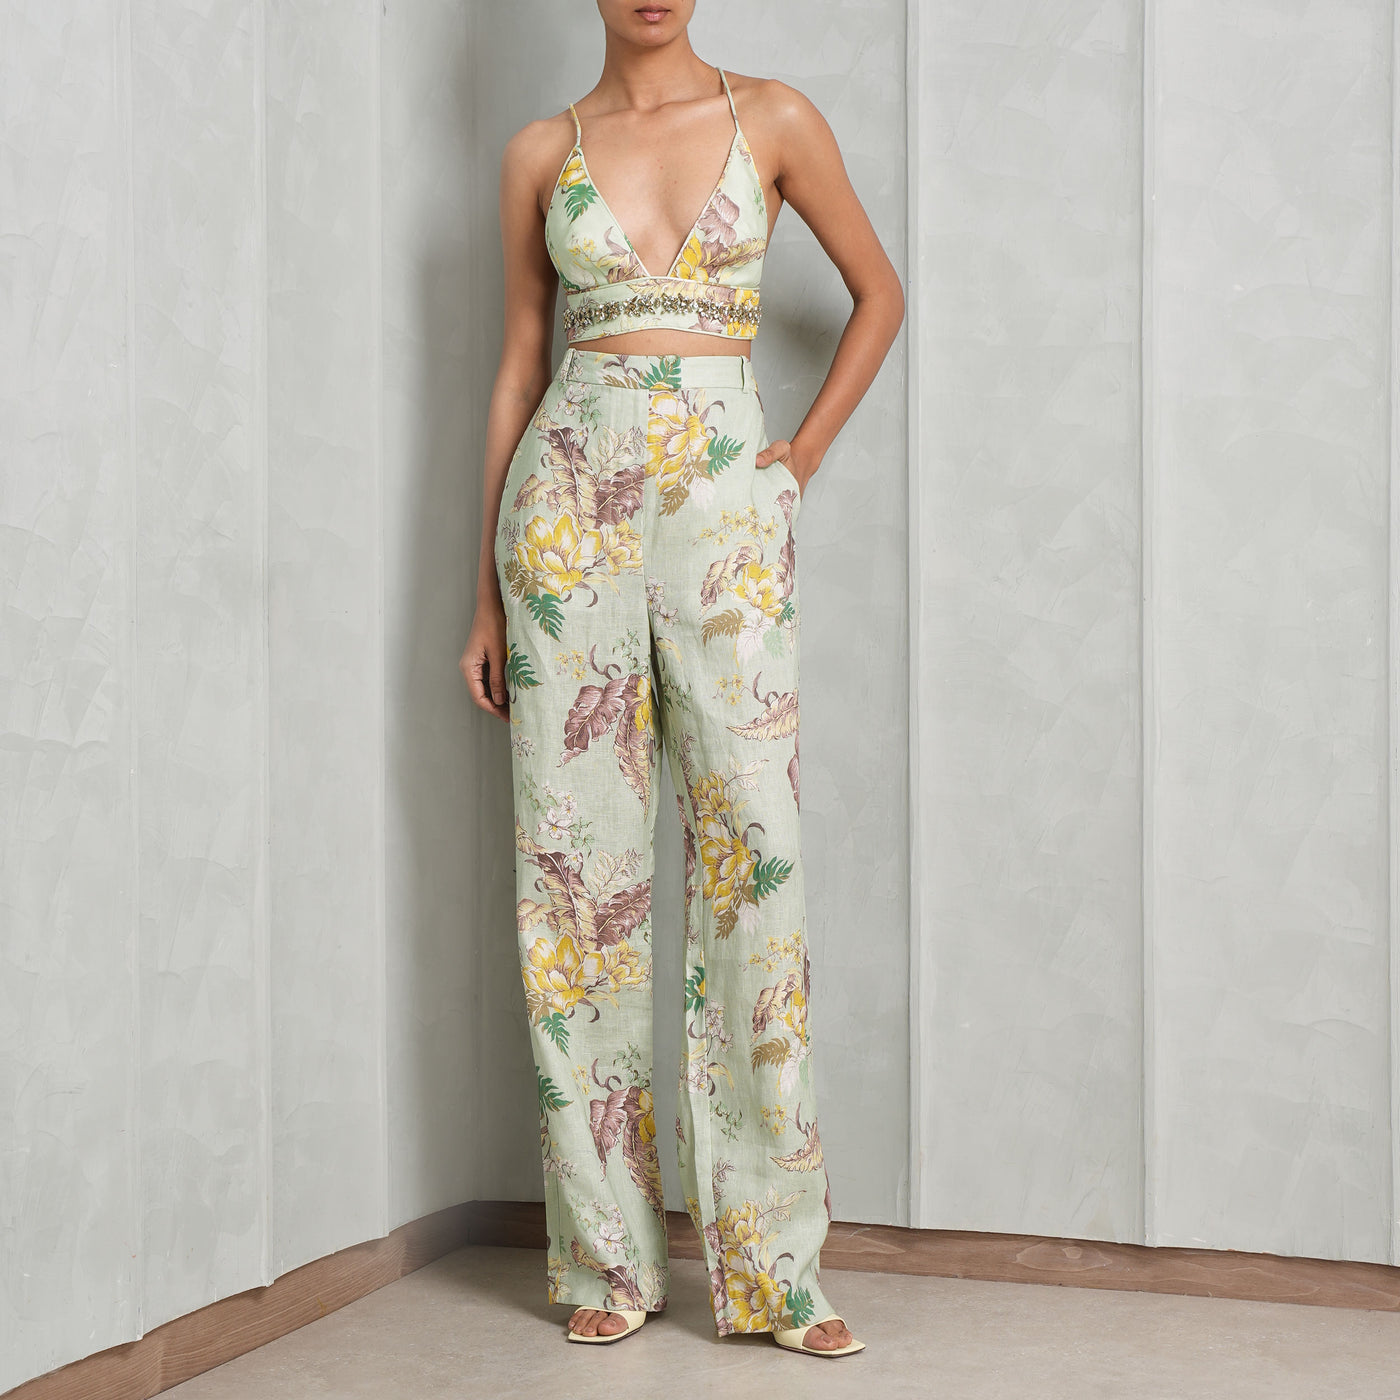 ZIMMERMANN green floral printed matchmaker bralette with matching pants